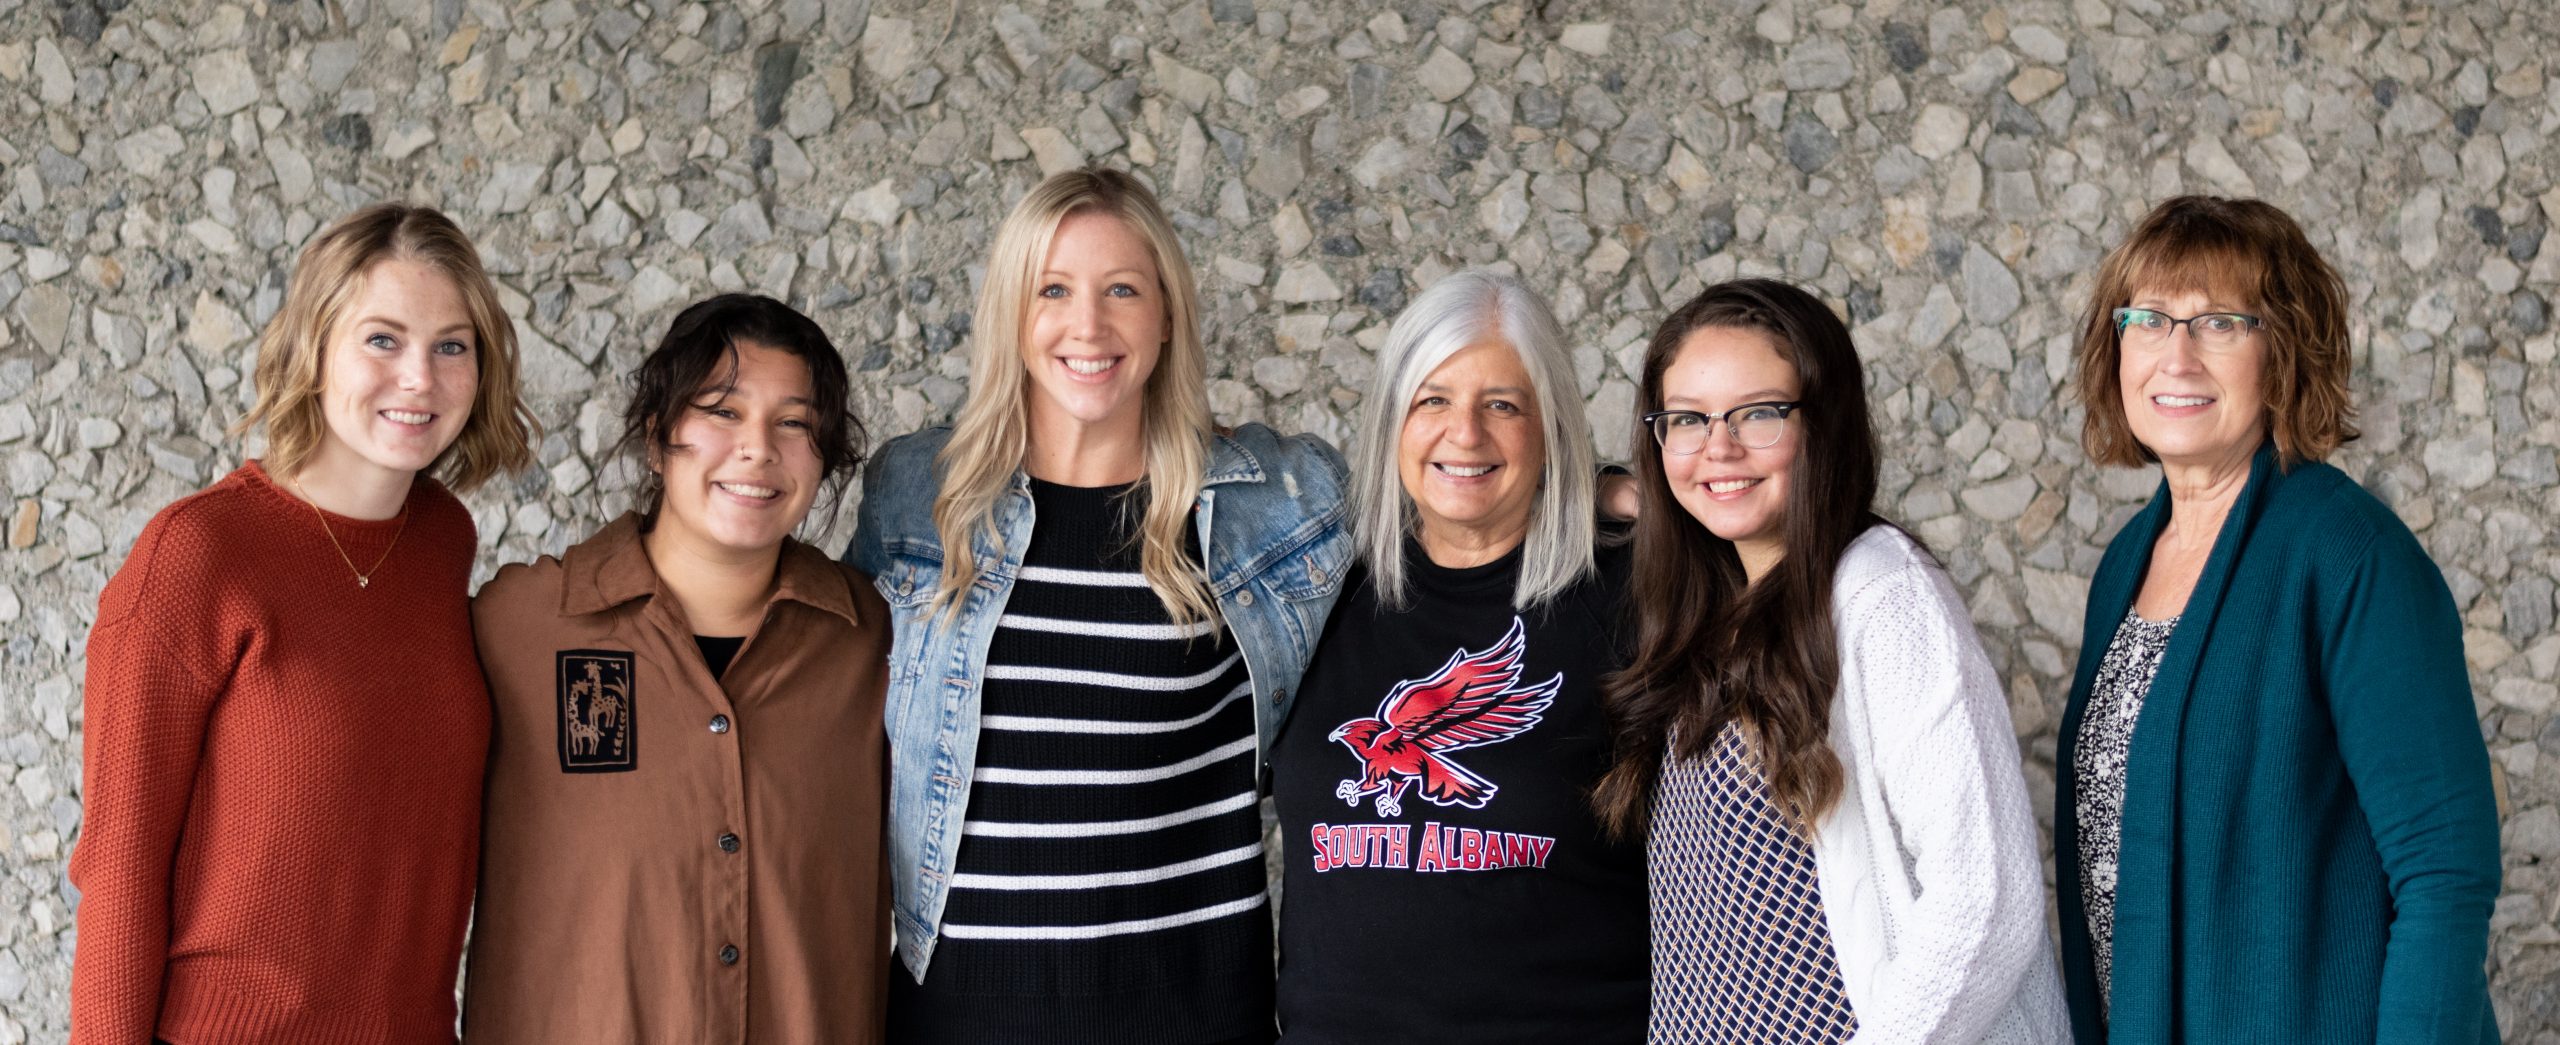 Group photo of Counseling Team, cropped waist up. Left to right: Katelyn Sawyer, Indica Stephenson, Joyce Lebengood, Ann Bailey, Rosa Davalos, and Vickie Sparks